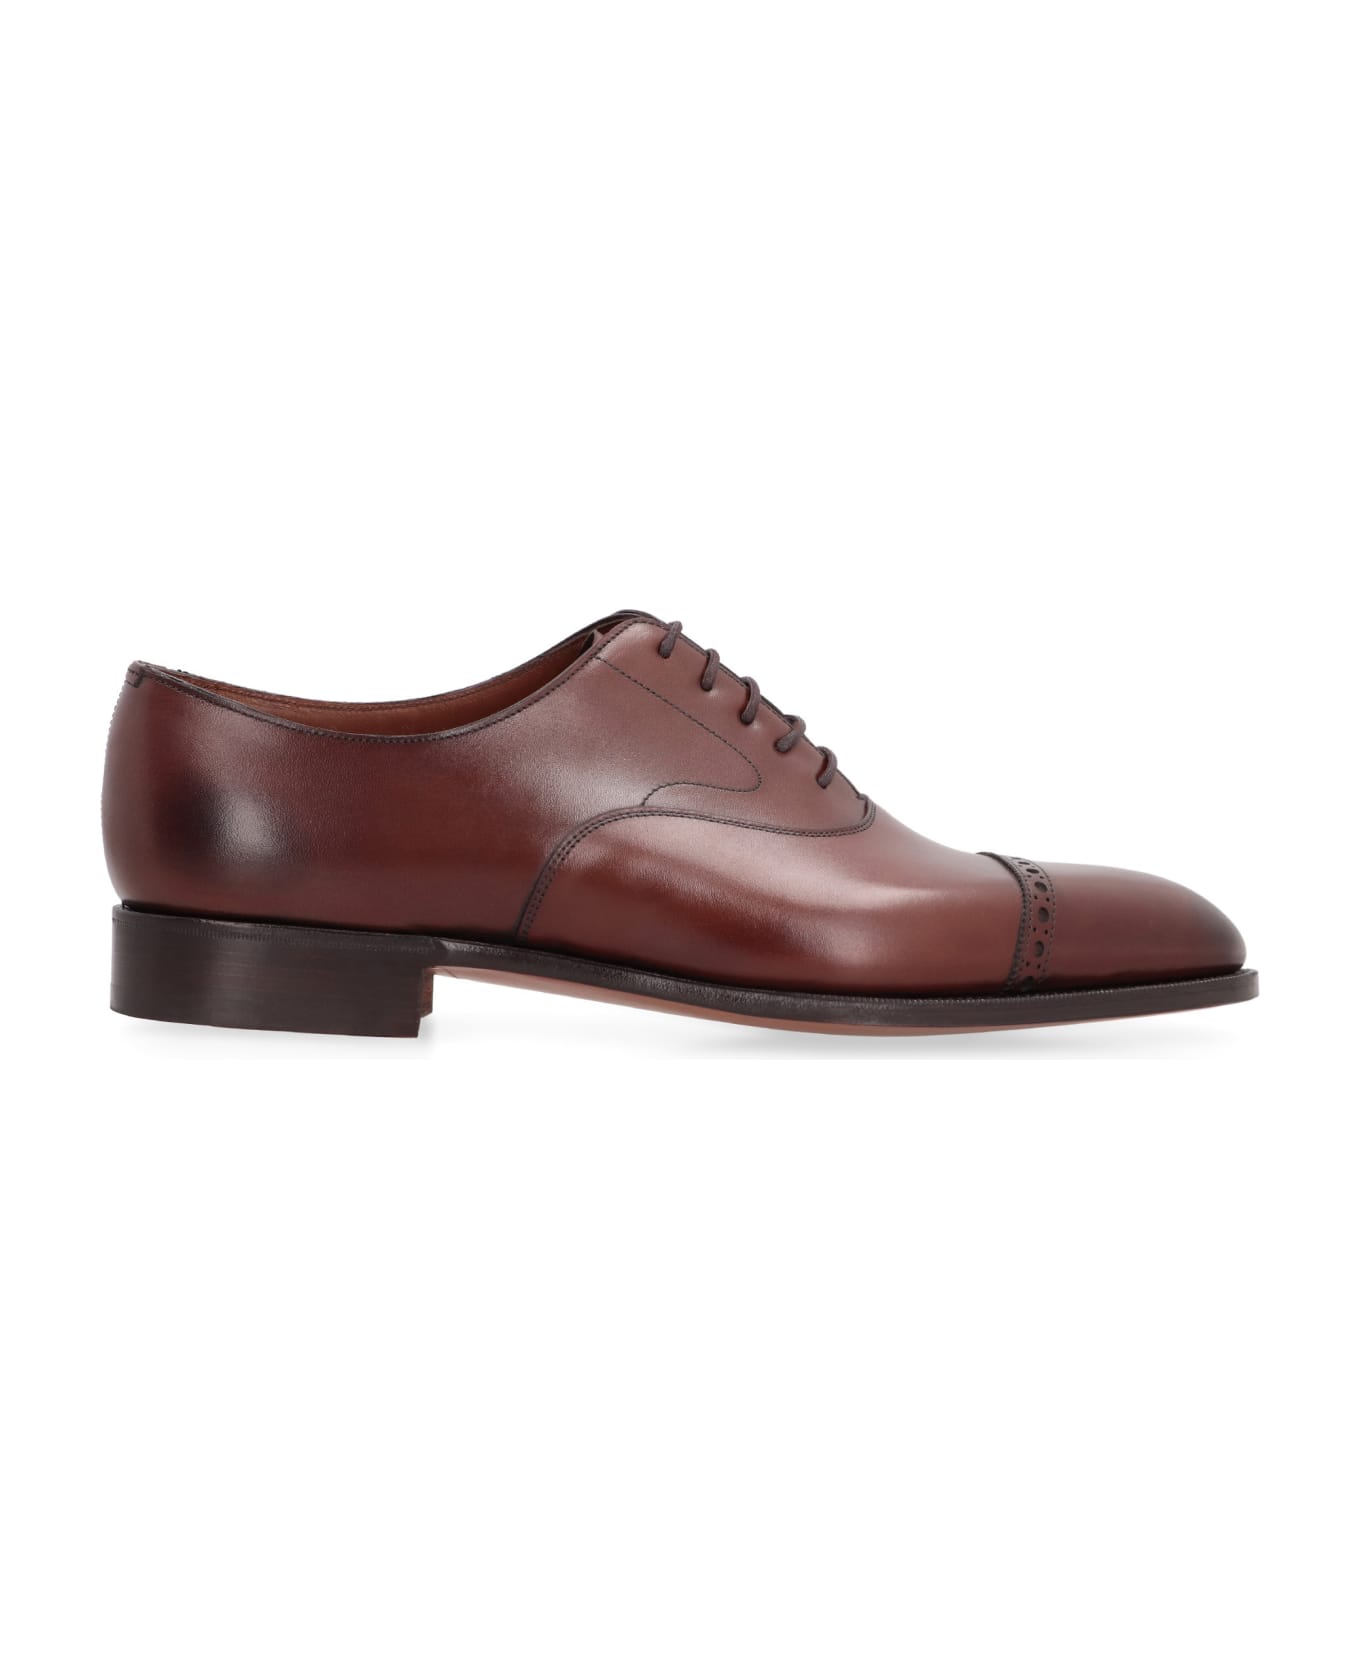 Edward Green Leather Lace-up Shoes - brown